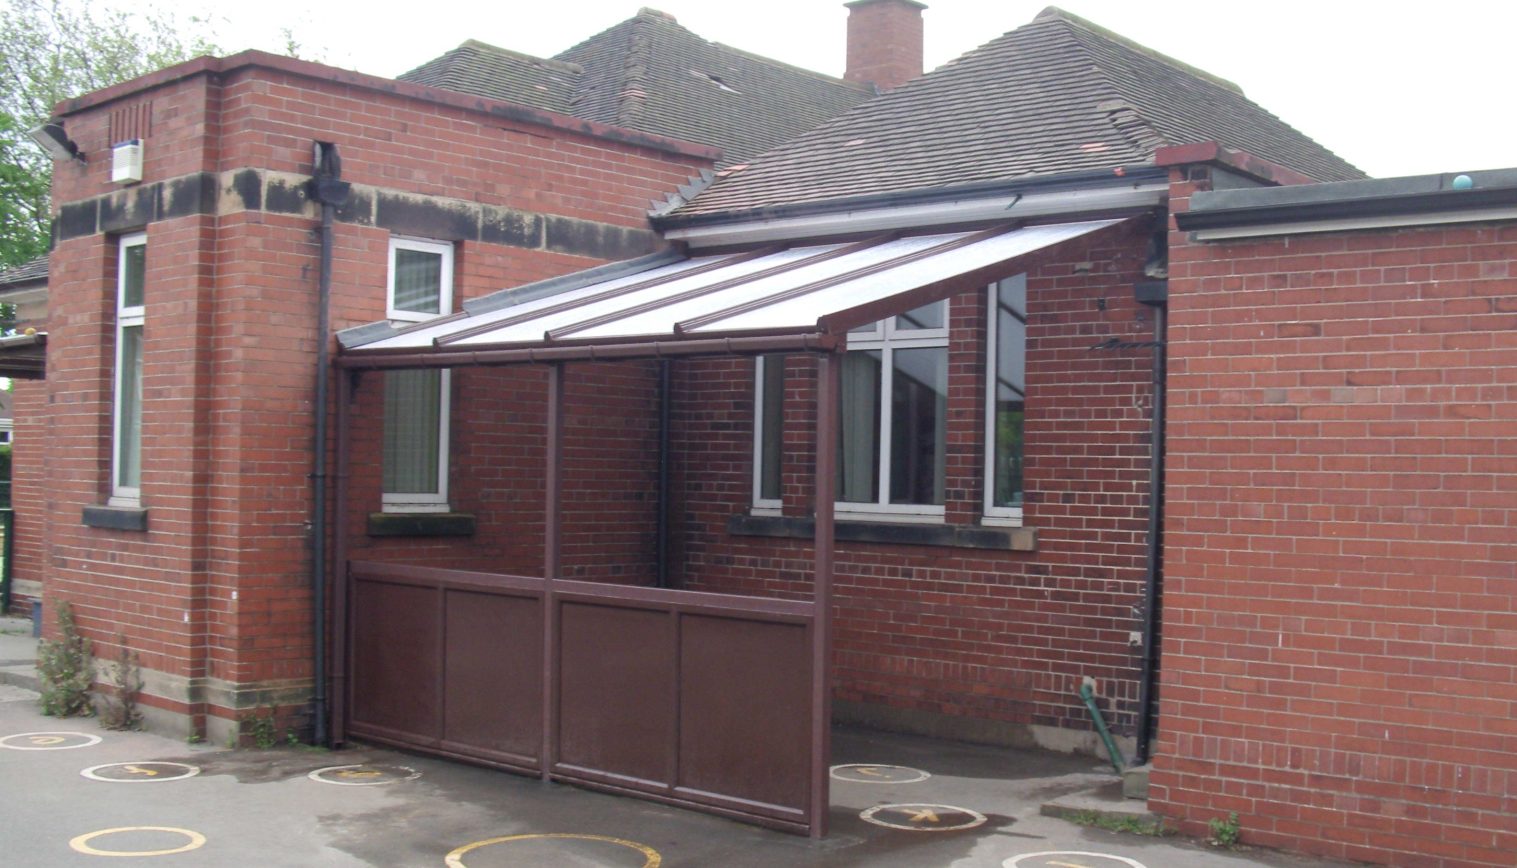 Montagu Primary School – Wall Mounted Canopy